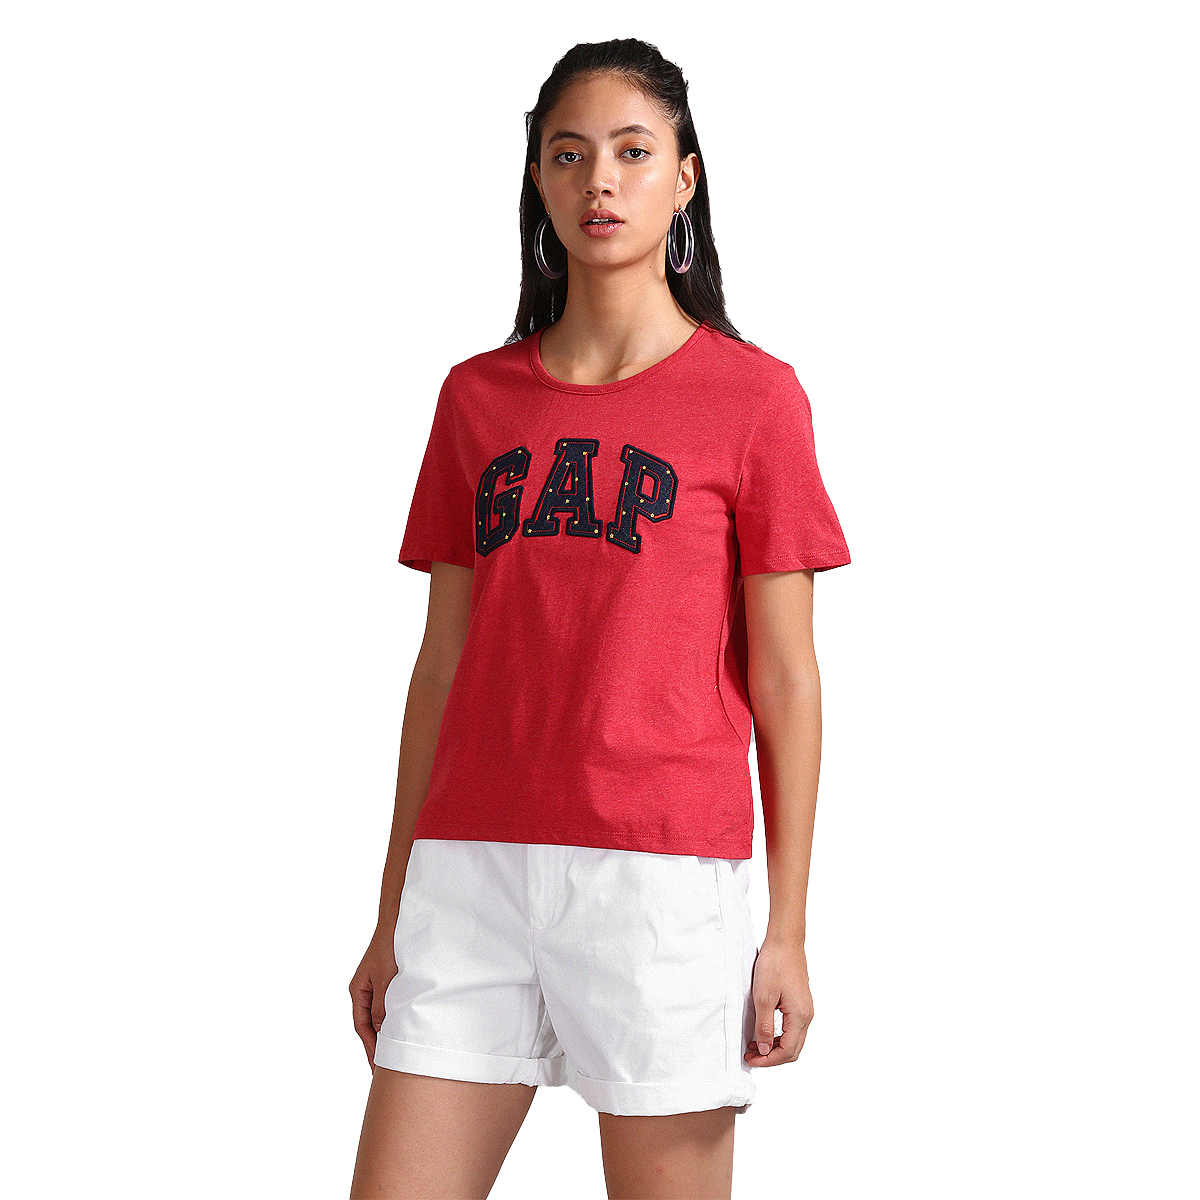 Gap Solid Color Round Neck Short Sleeve T-Shirt Styled with Logo Applique - Red